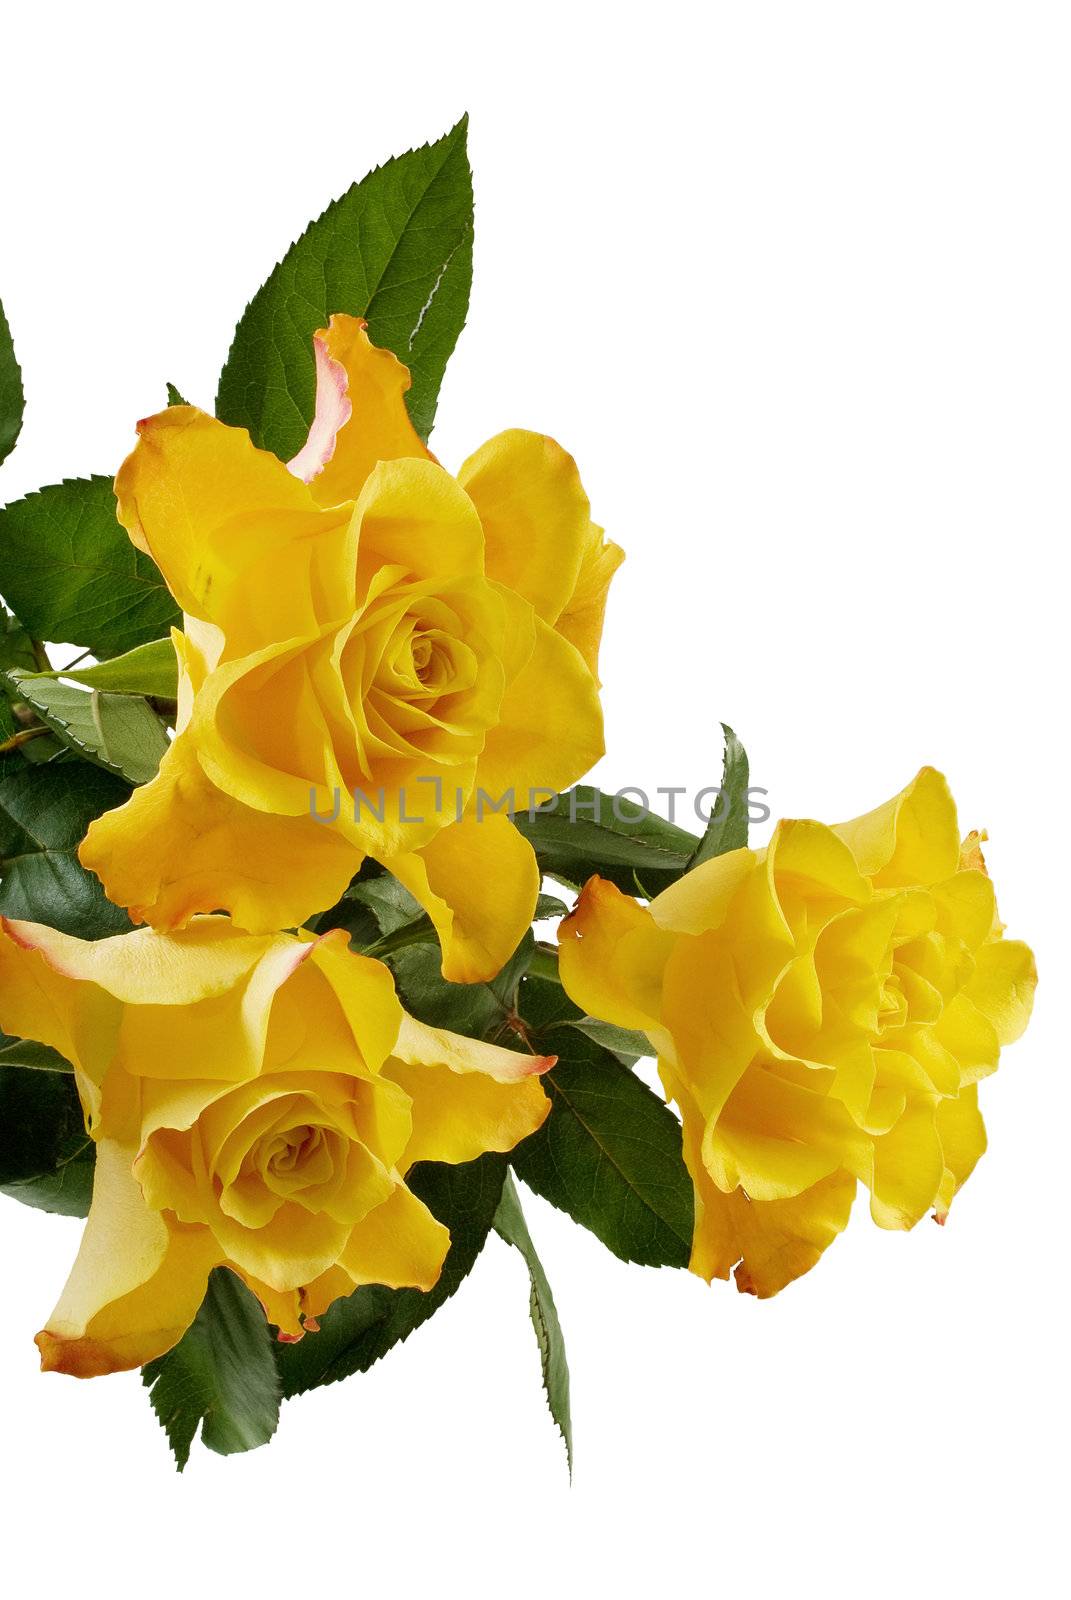 Three yellow roses isolated on the white background by BIG_TAU